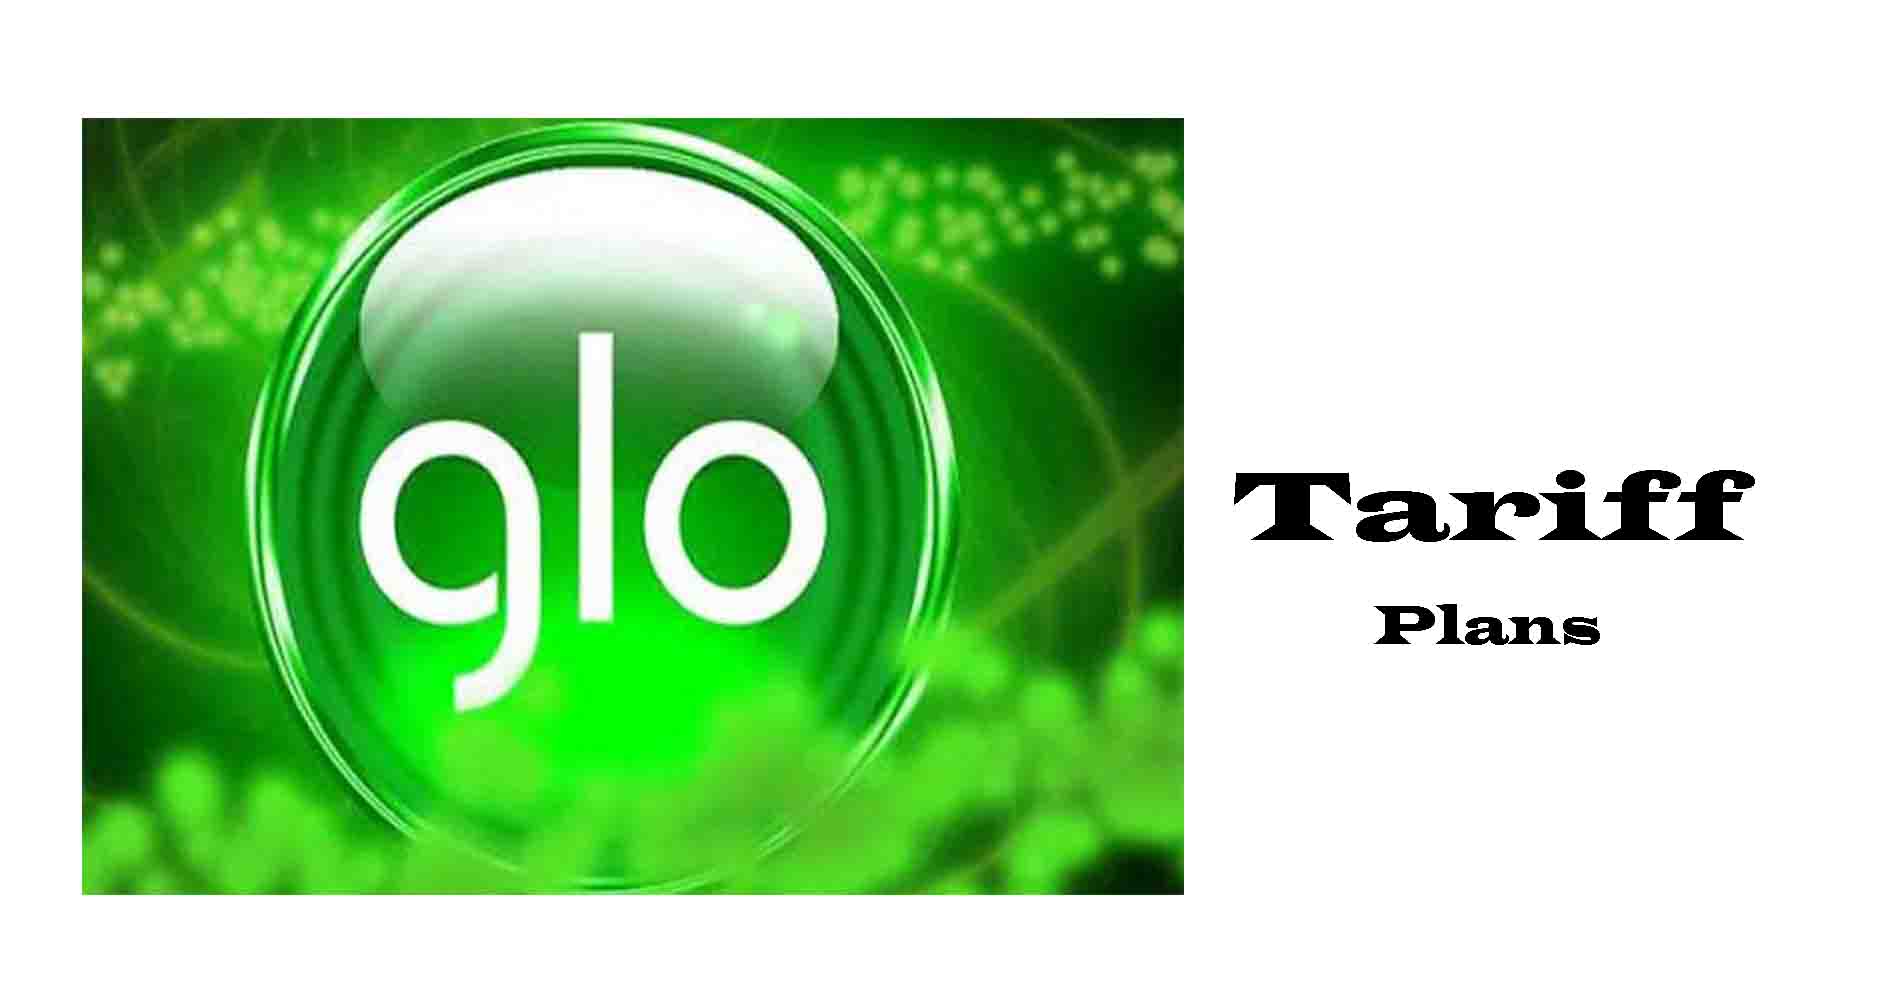 Glo tariff plans and their migration codes